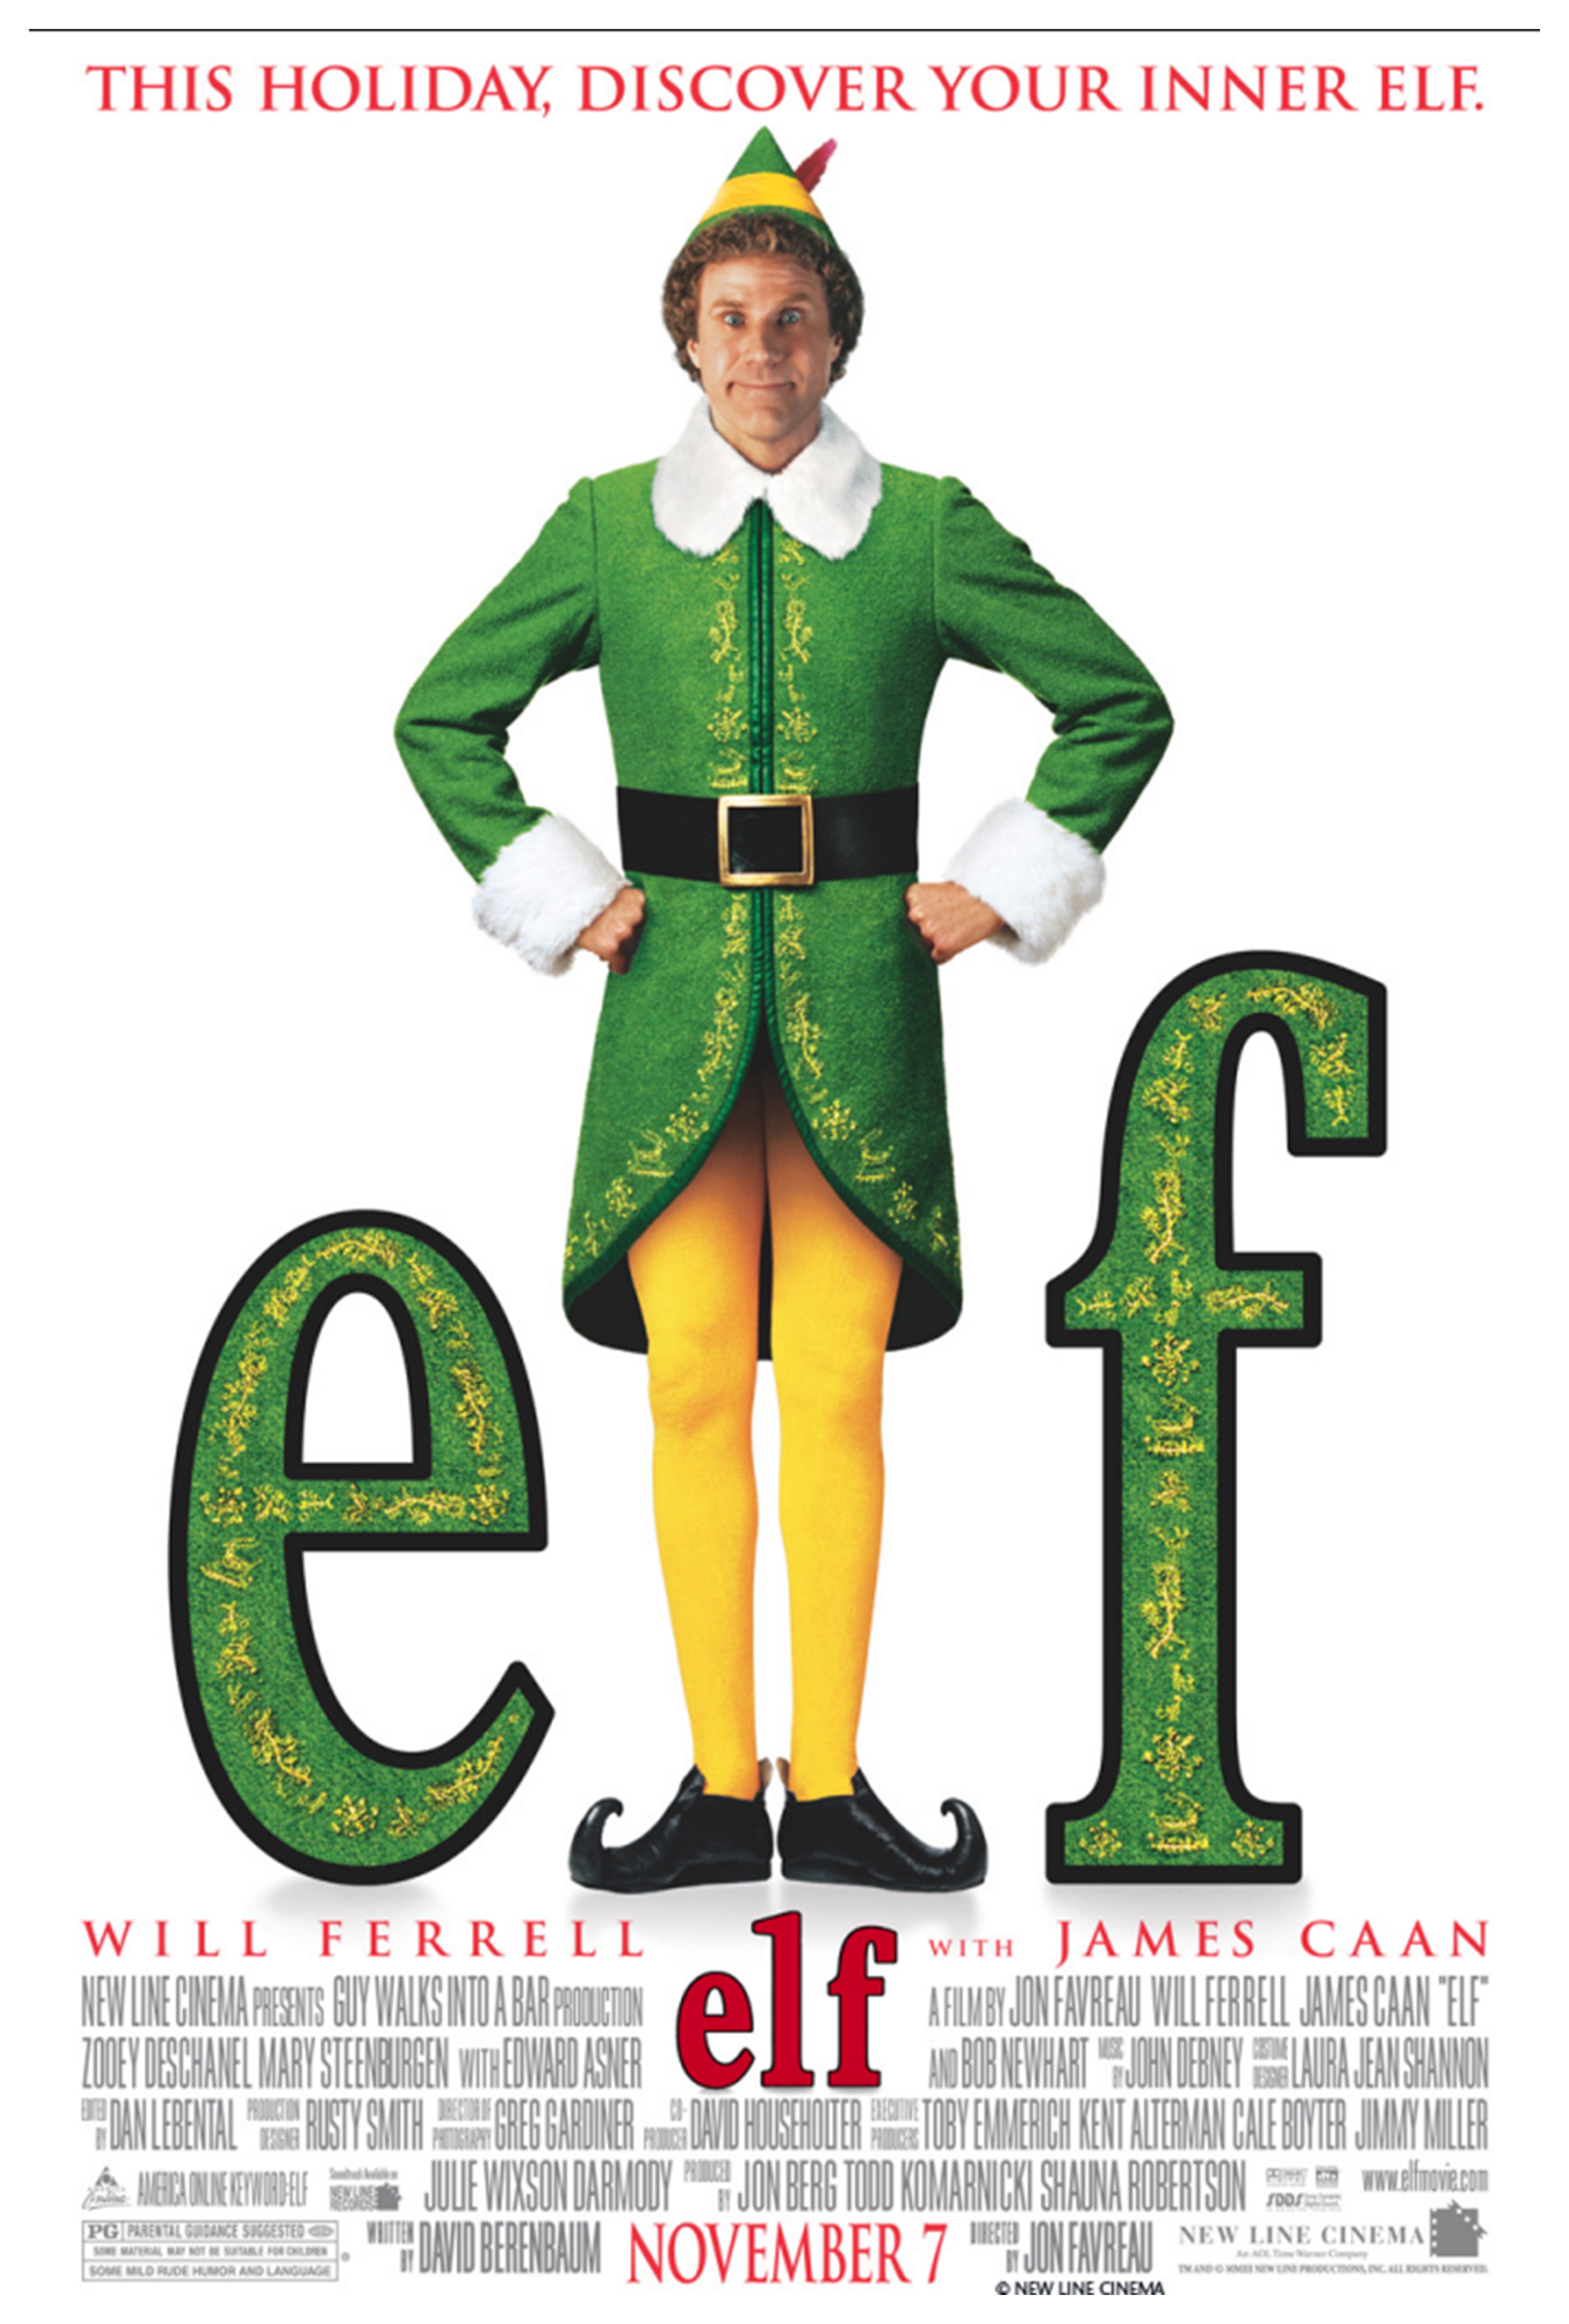 Film poster for Elf featuring an elf standing-in as the letter "L" between two green letters "e" and "f" on a white background.